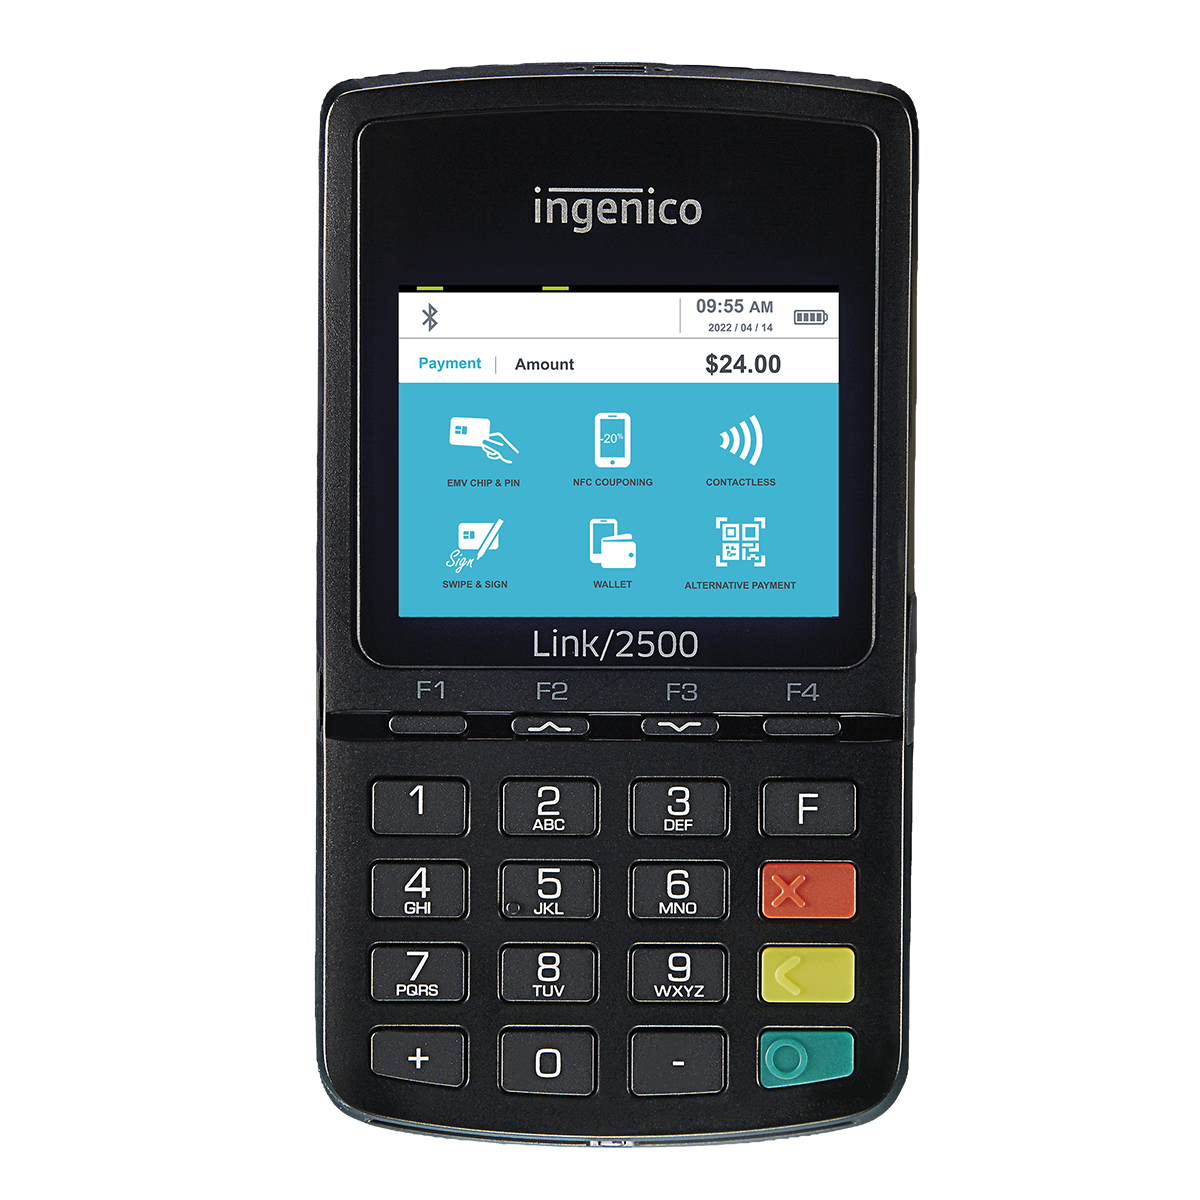 Ingenico-Link2500-face-1200px.png